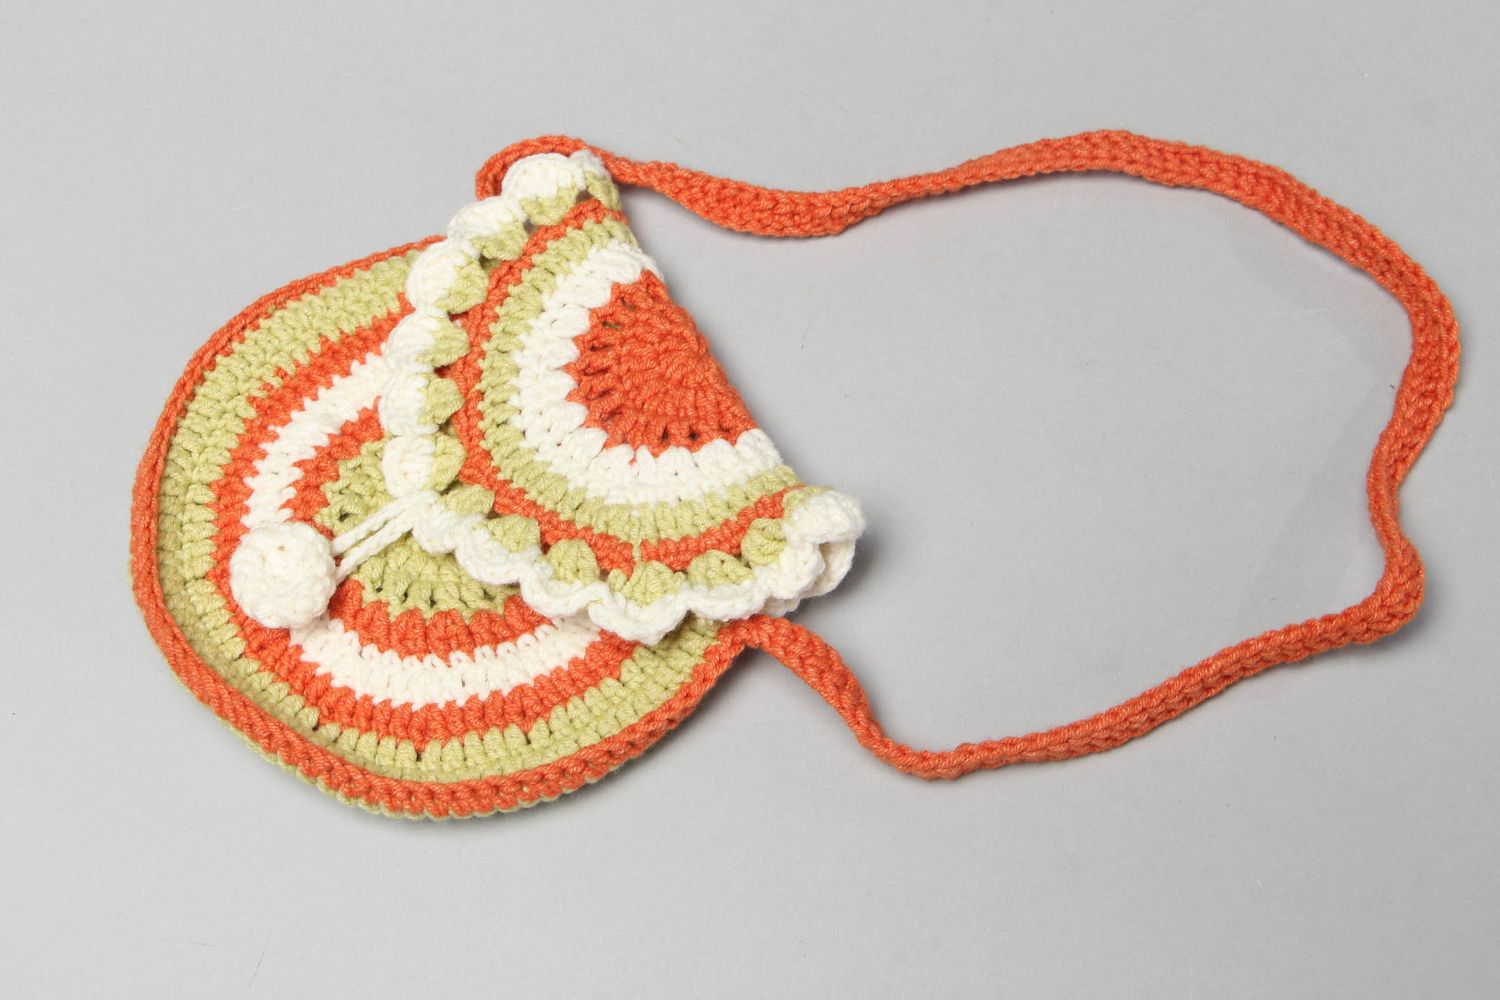 Small crochet bag with long strap photo 1